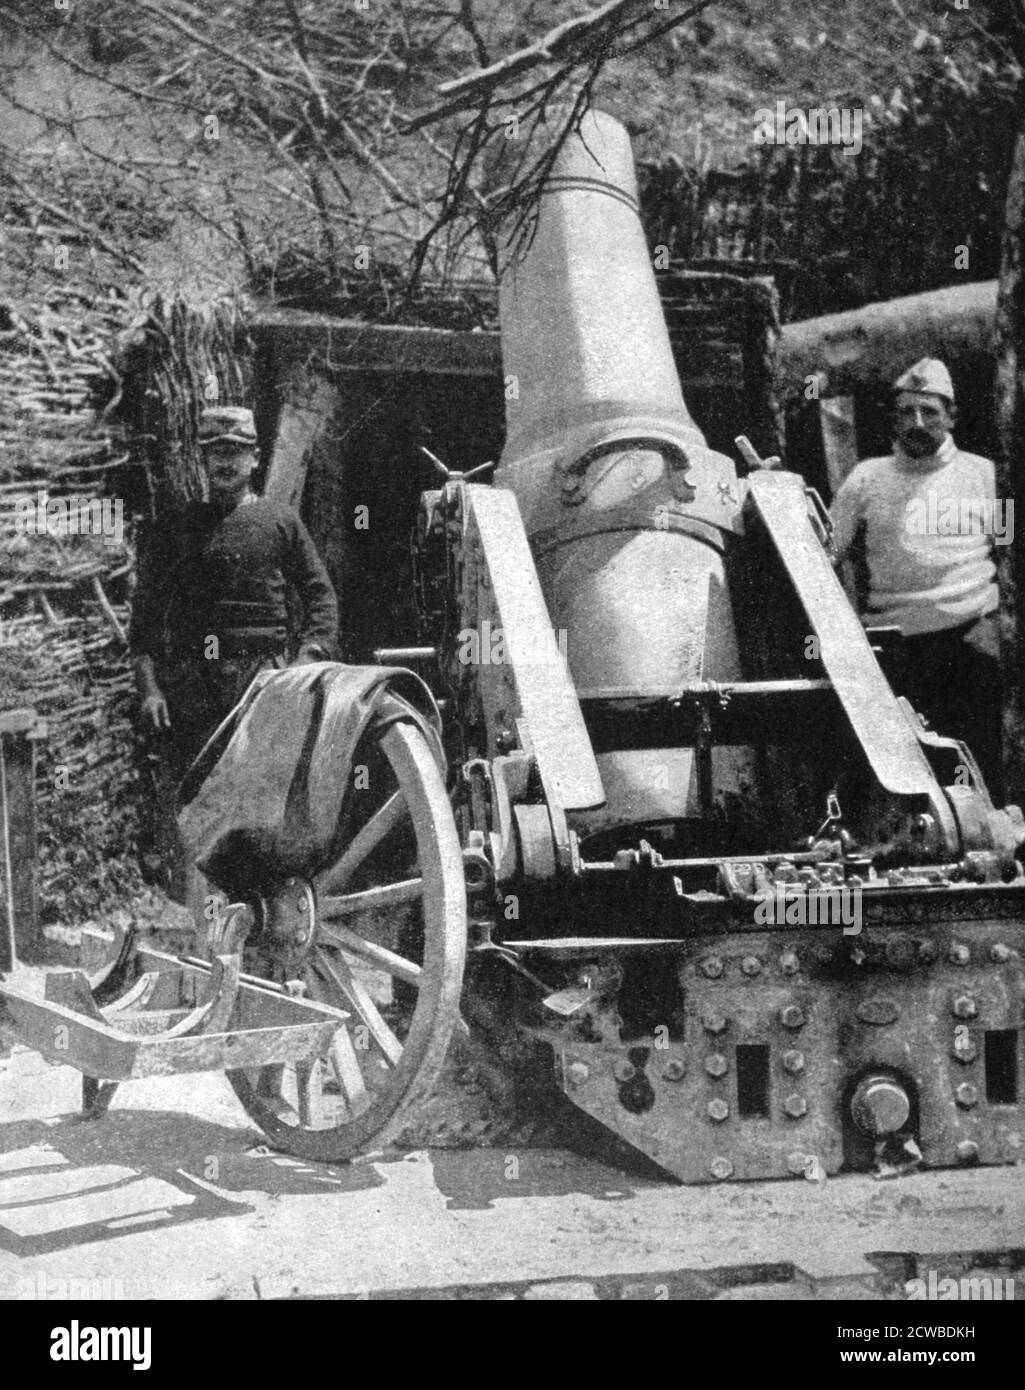 French 270 heavy artillery mortar, Artois, France, World War I,1915. Mortars were regarded as more effective than conventional artillery because the high trajectory of their projectiles meant they could fall directly into trenches. A print from Le Pays de France, 30 September 1915. The photographer is unknown. Stock Photo